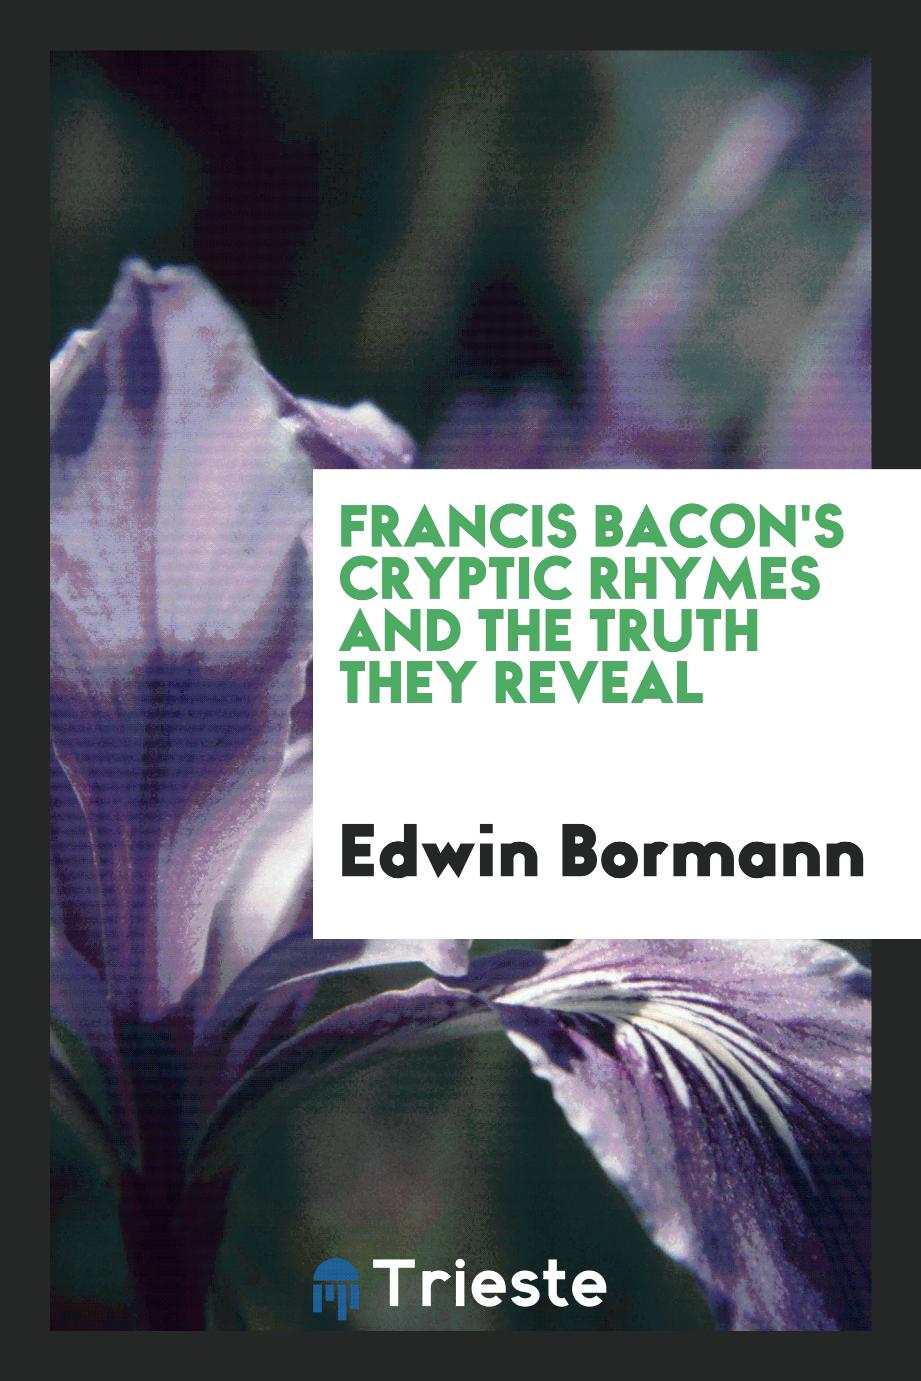 Francis Bacon's cryptic rhymes and the truth they reveal